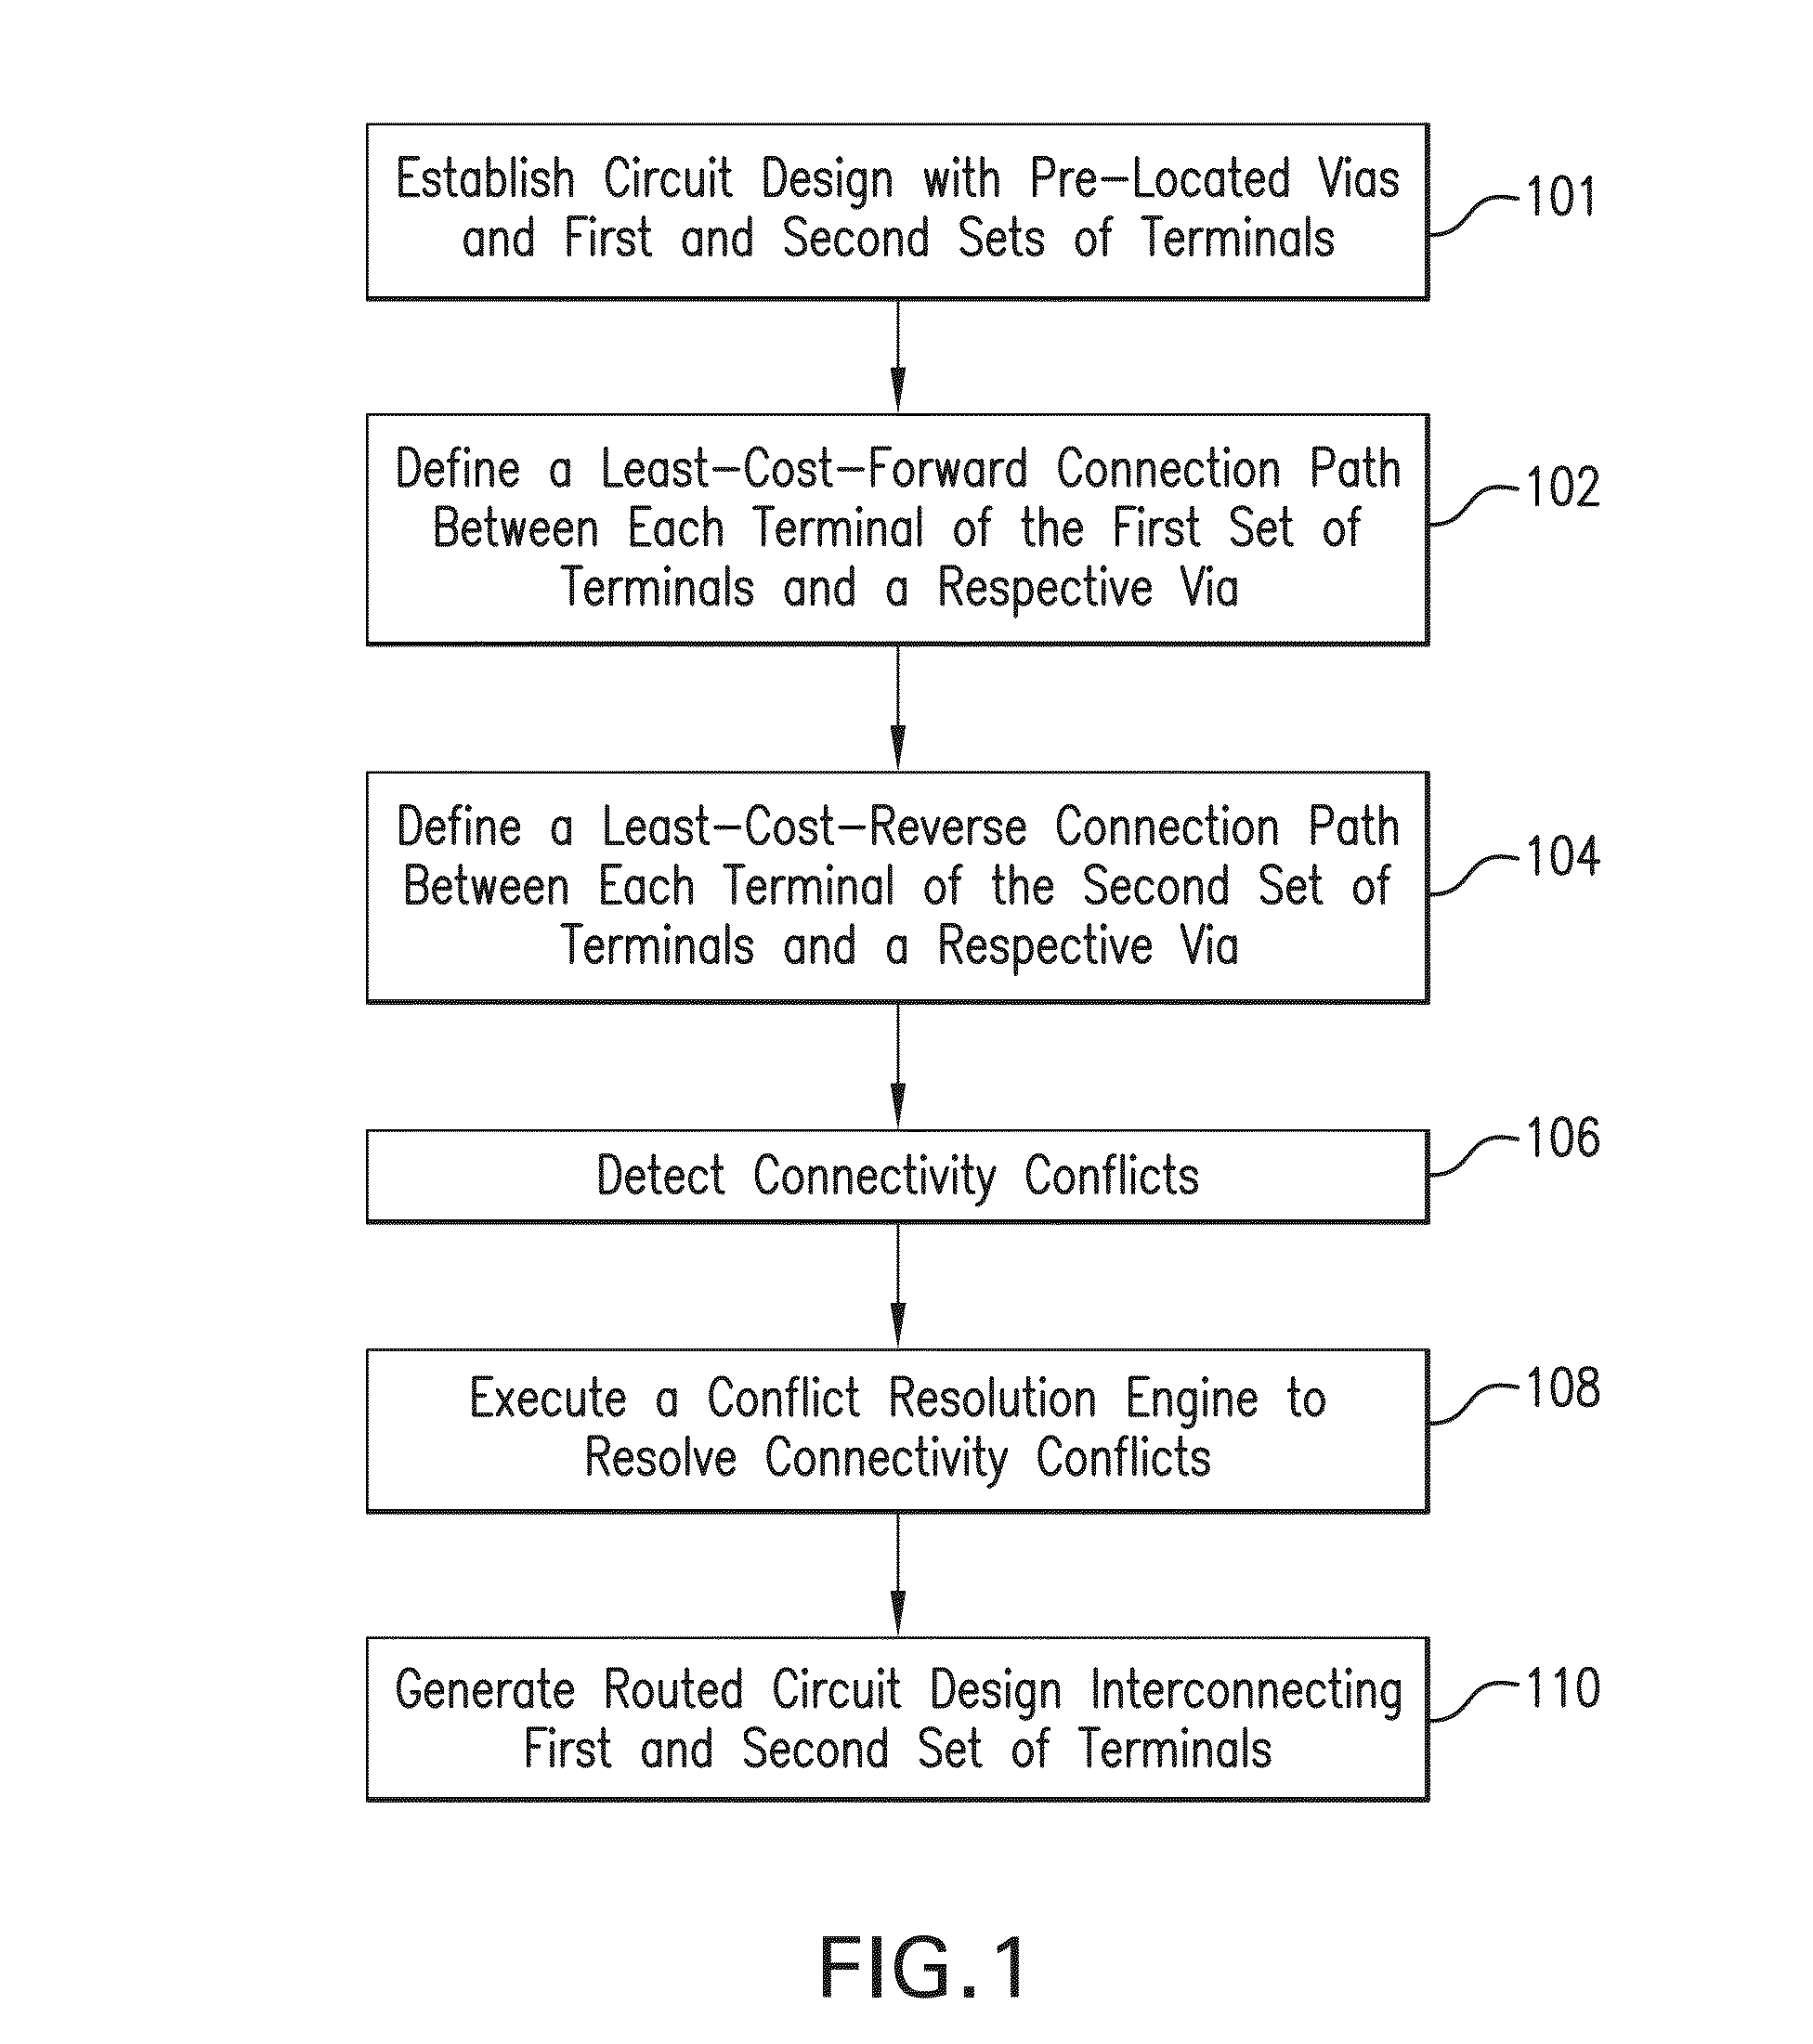 Method and system for routing optimally between terminals through intermediate vias in a circuit design